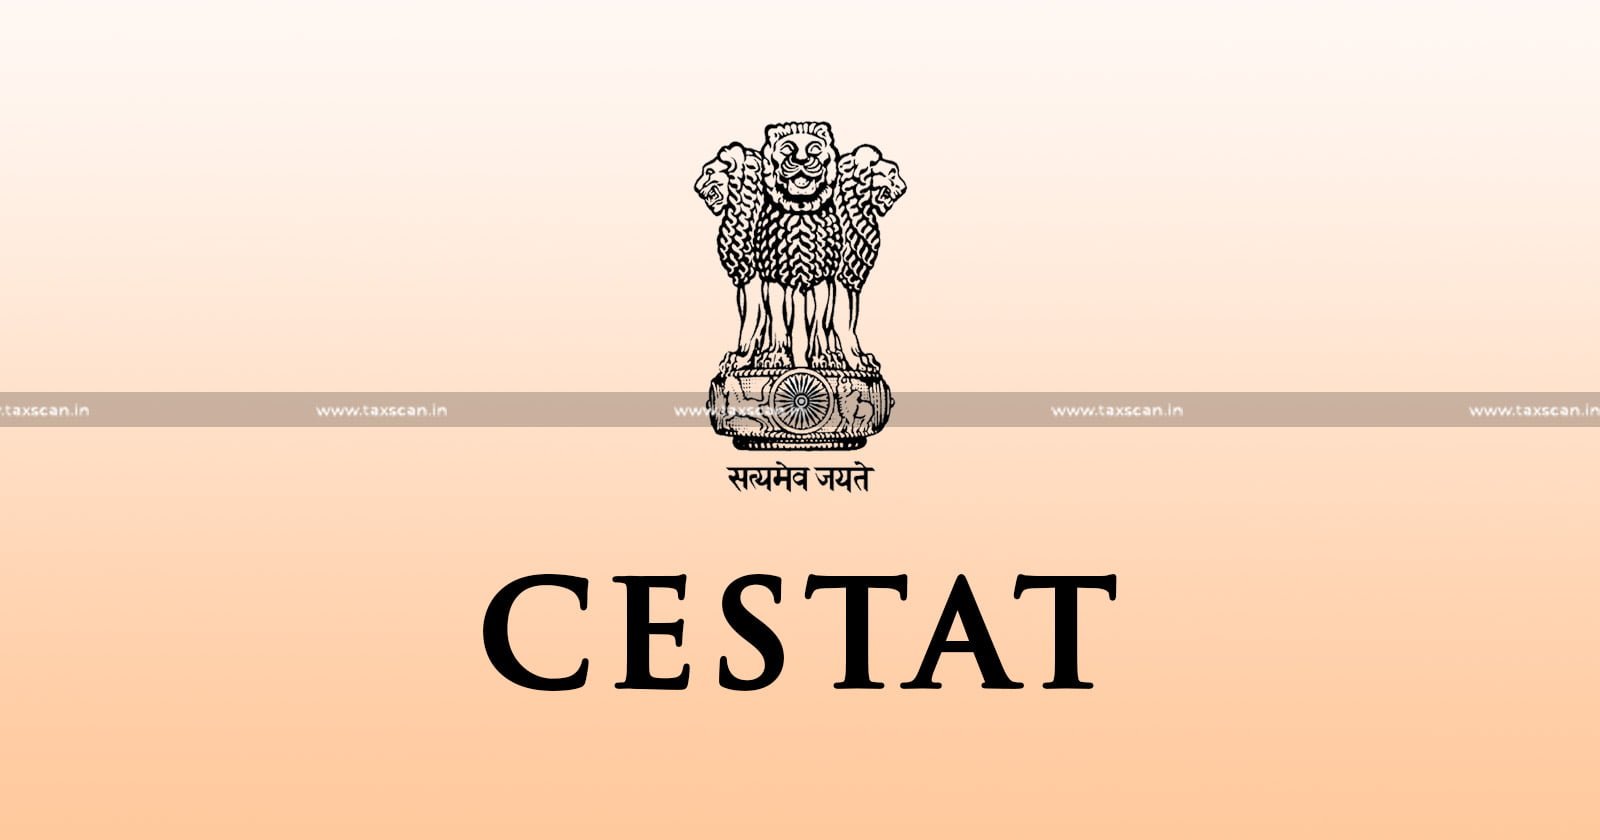 Witness -Central Excise Authorities - Cross-Examination - CESTAT - taxscan